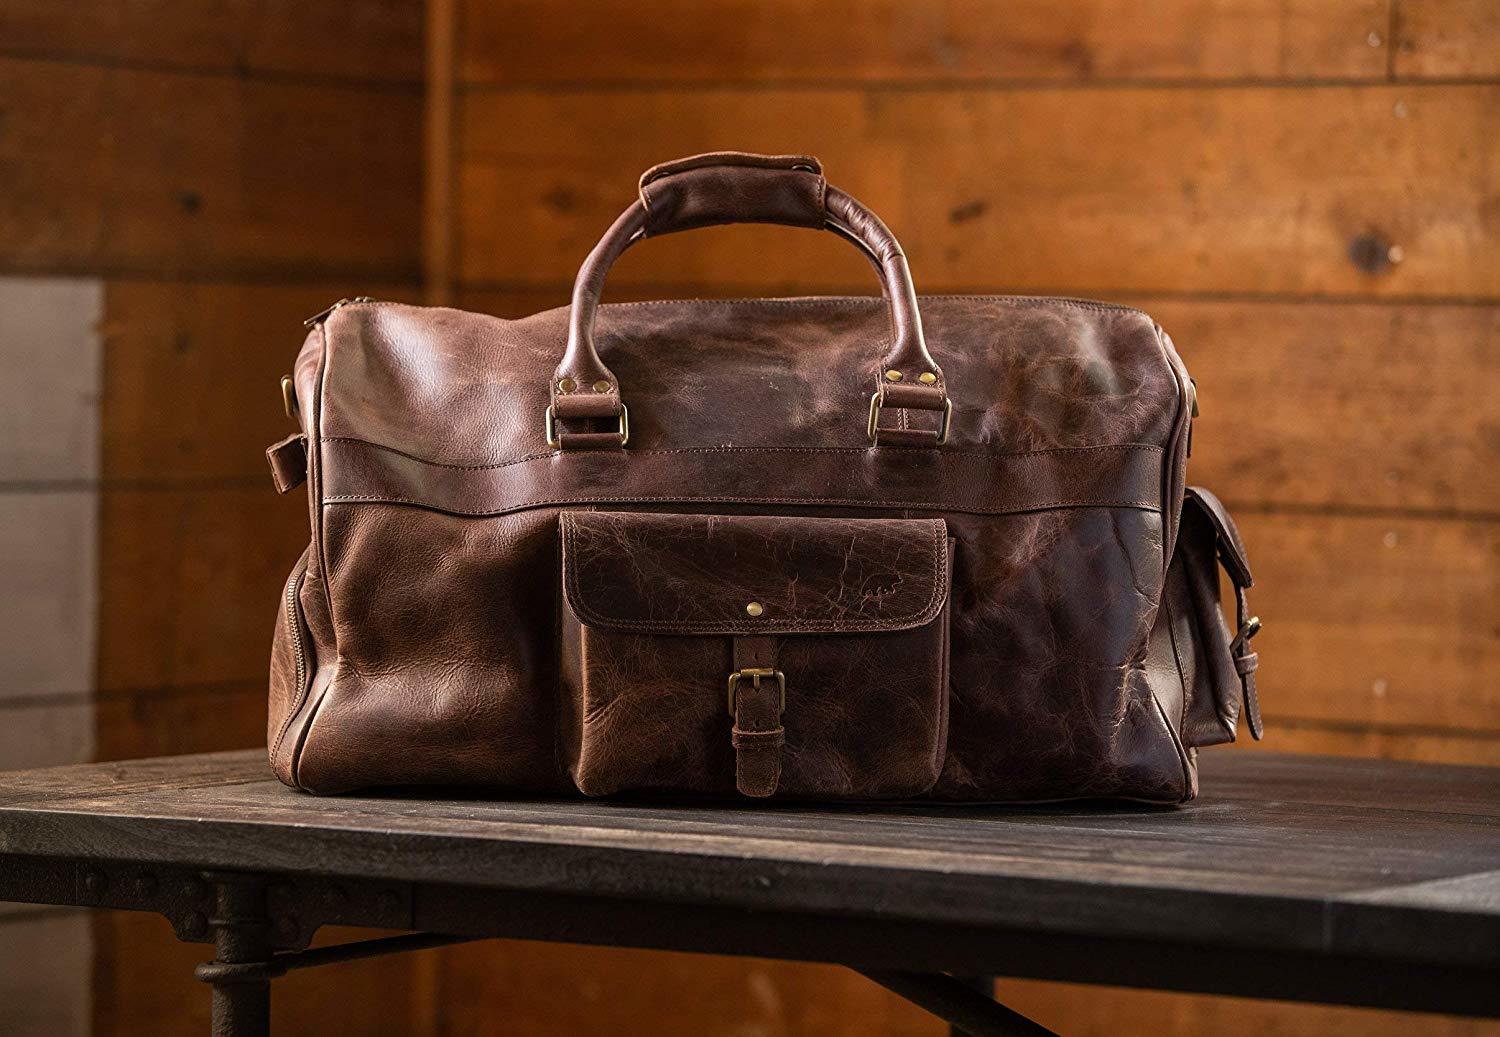 The Best Duffel Bags of 2020: Stylish and Durable